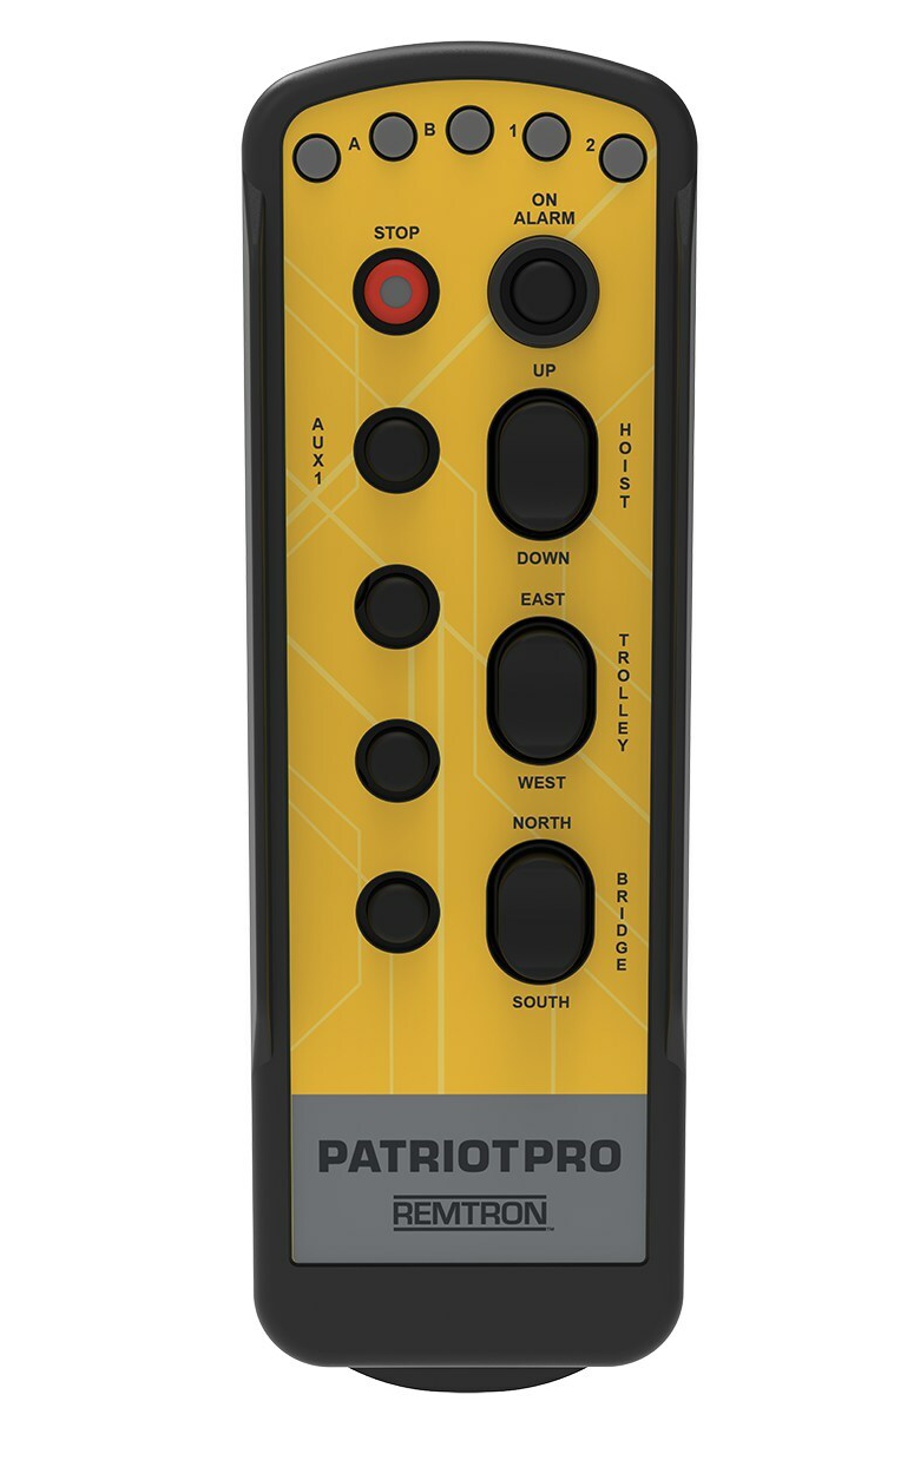 Industrial Remote Control just got intuitive with the Cattron PatriotPro